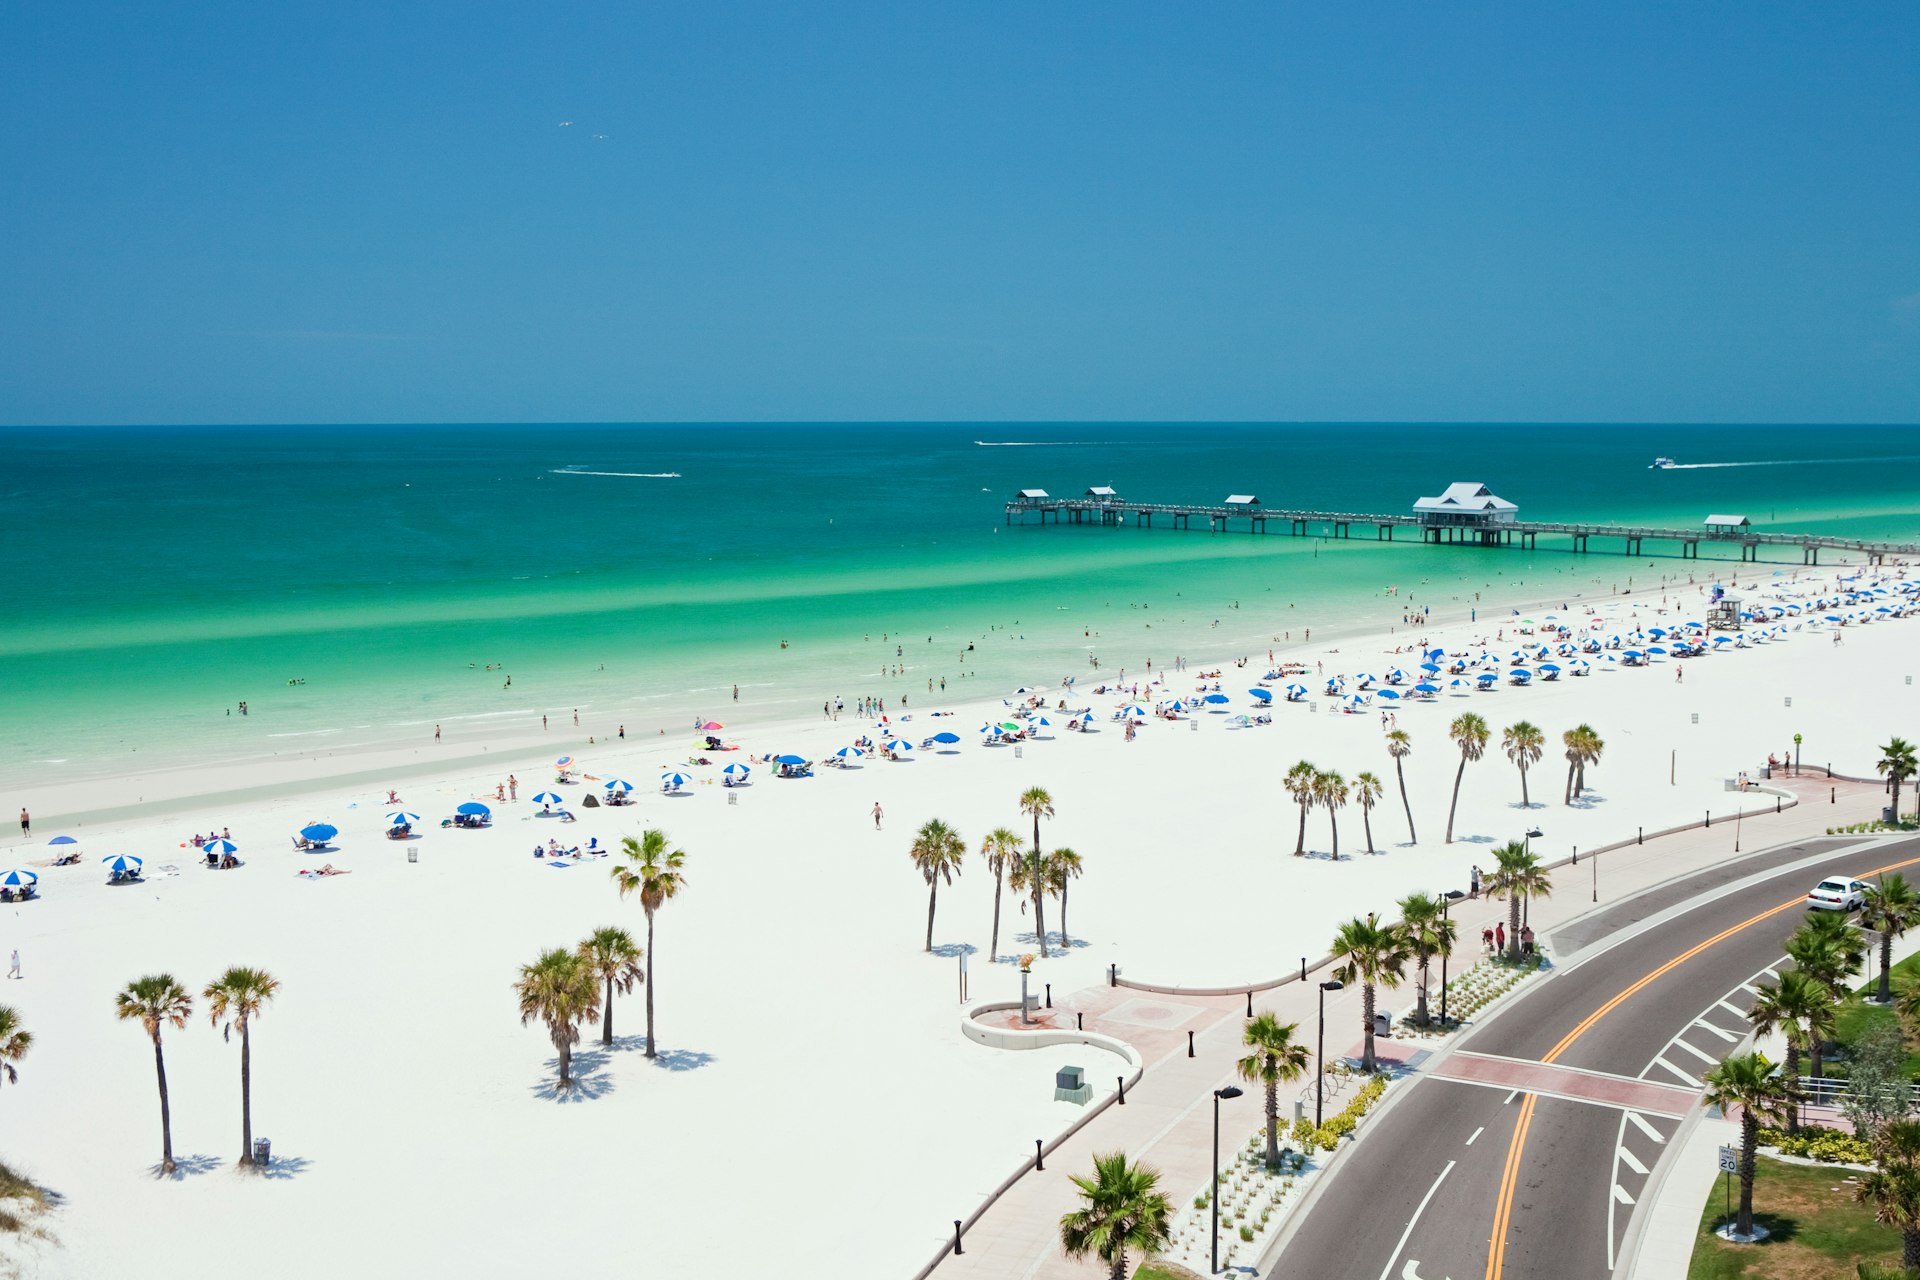 An aerial view of people on a white sand beach with turquoise water at Florida's Clearwater Beach